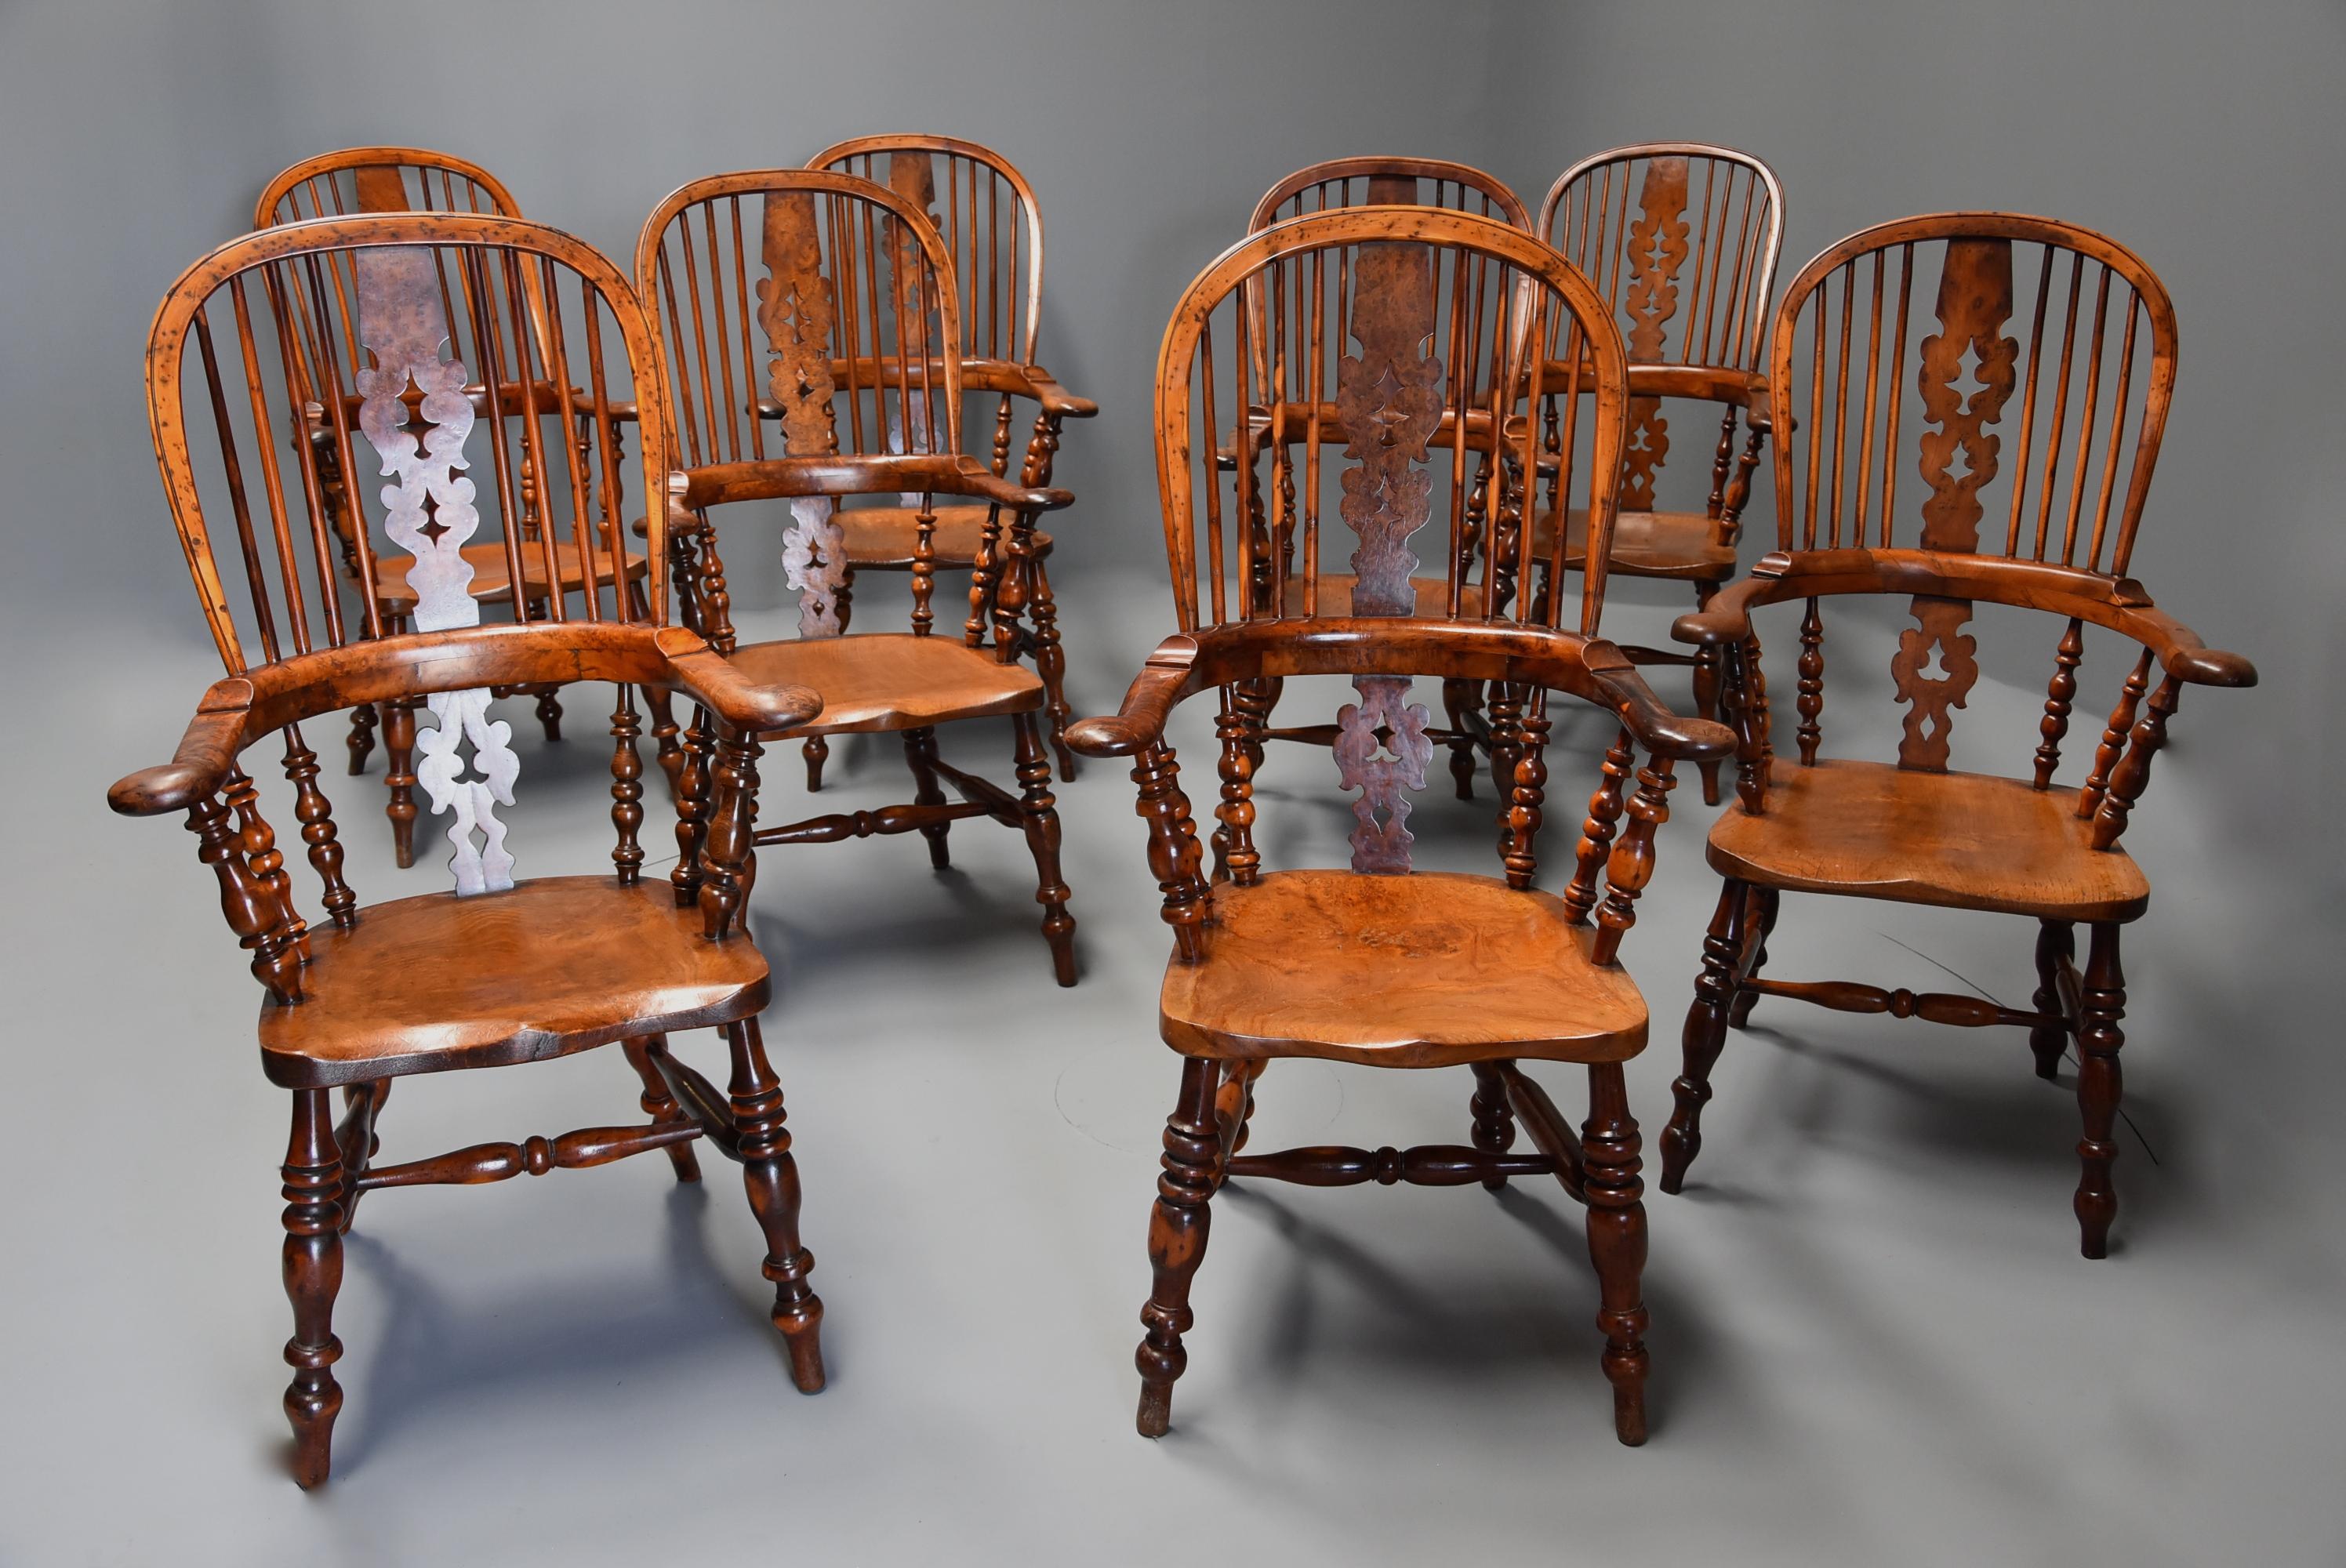 A superb rare set of eight 19th century burr yew broad arm high back Windsor armchairs of superb patina from the North of England, probably Yorkshire.

The chairs consist of a top hoop of burr yew, some with more burr than others, with four